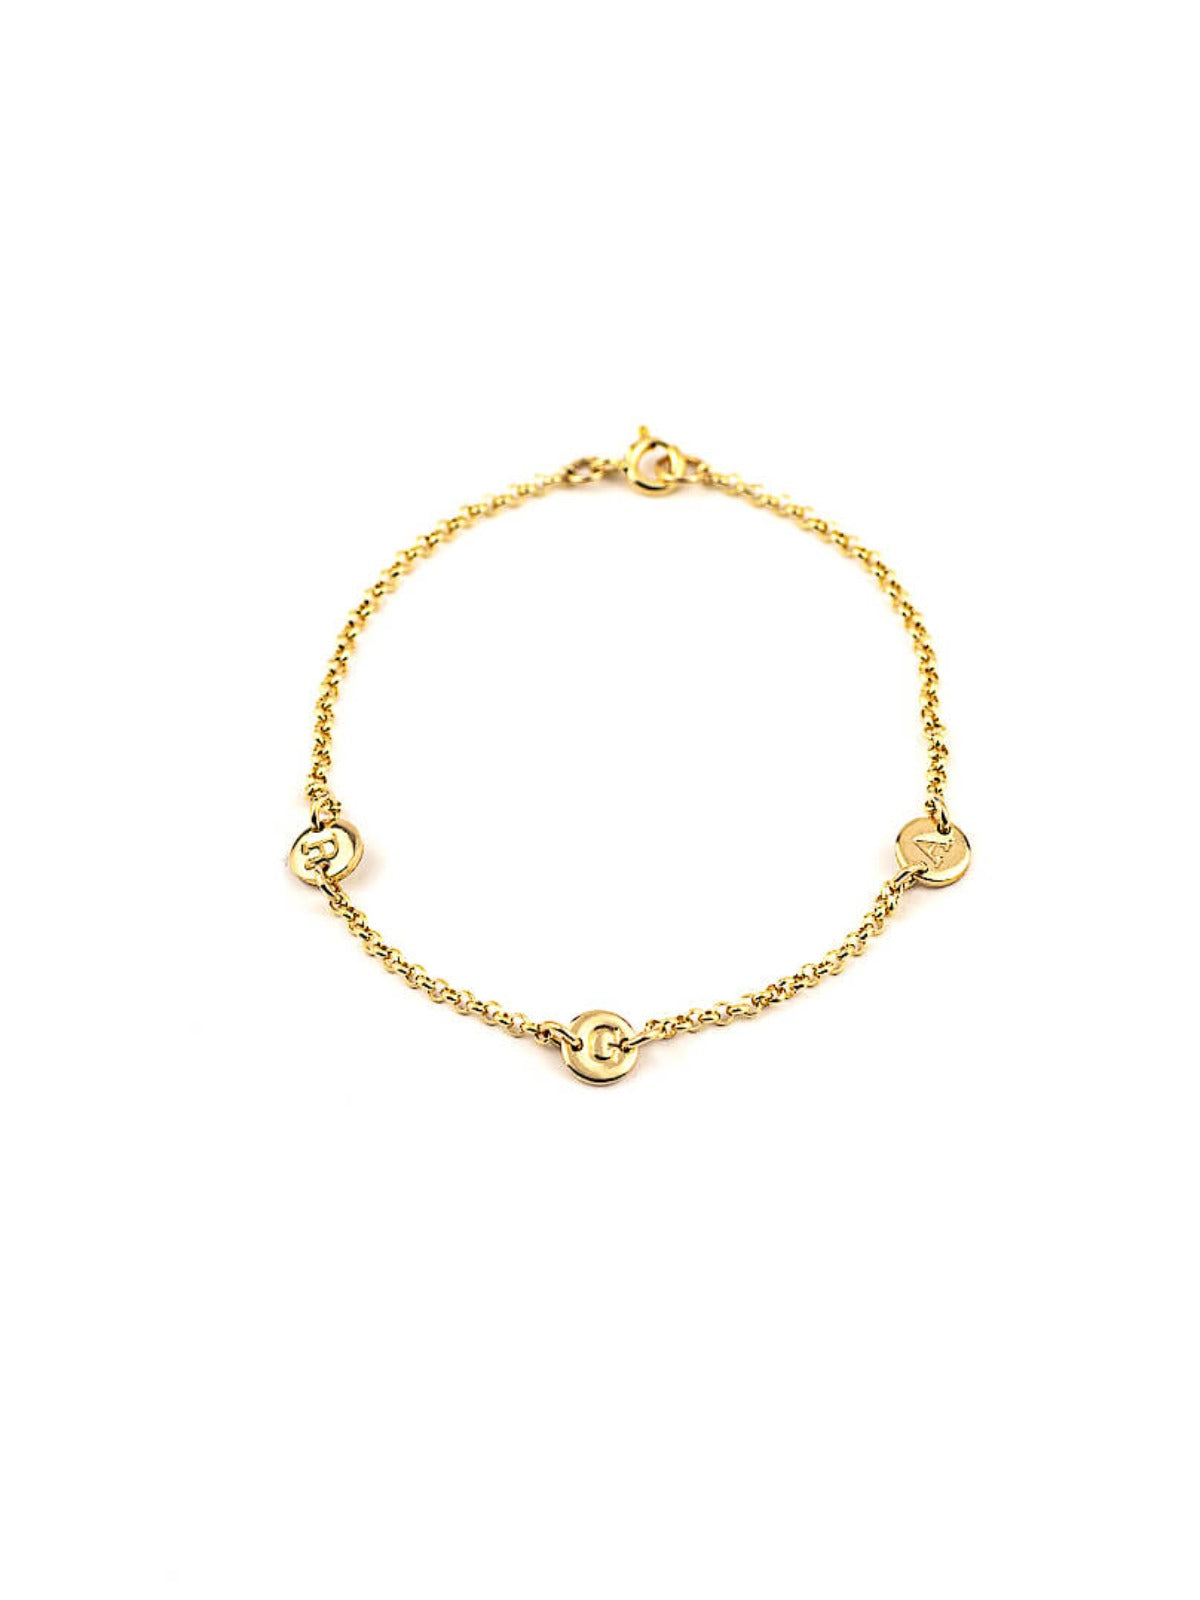 Gold bracelet personalised with letters